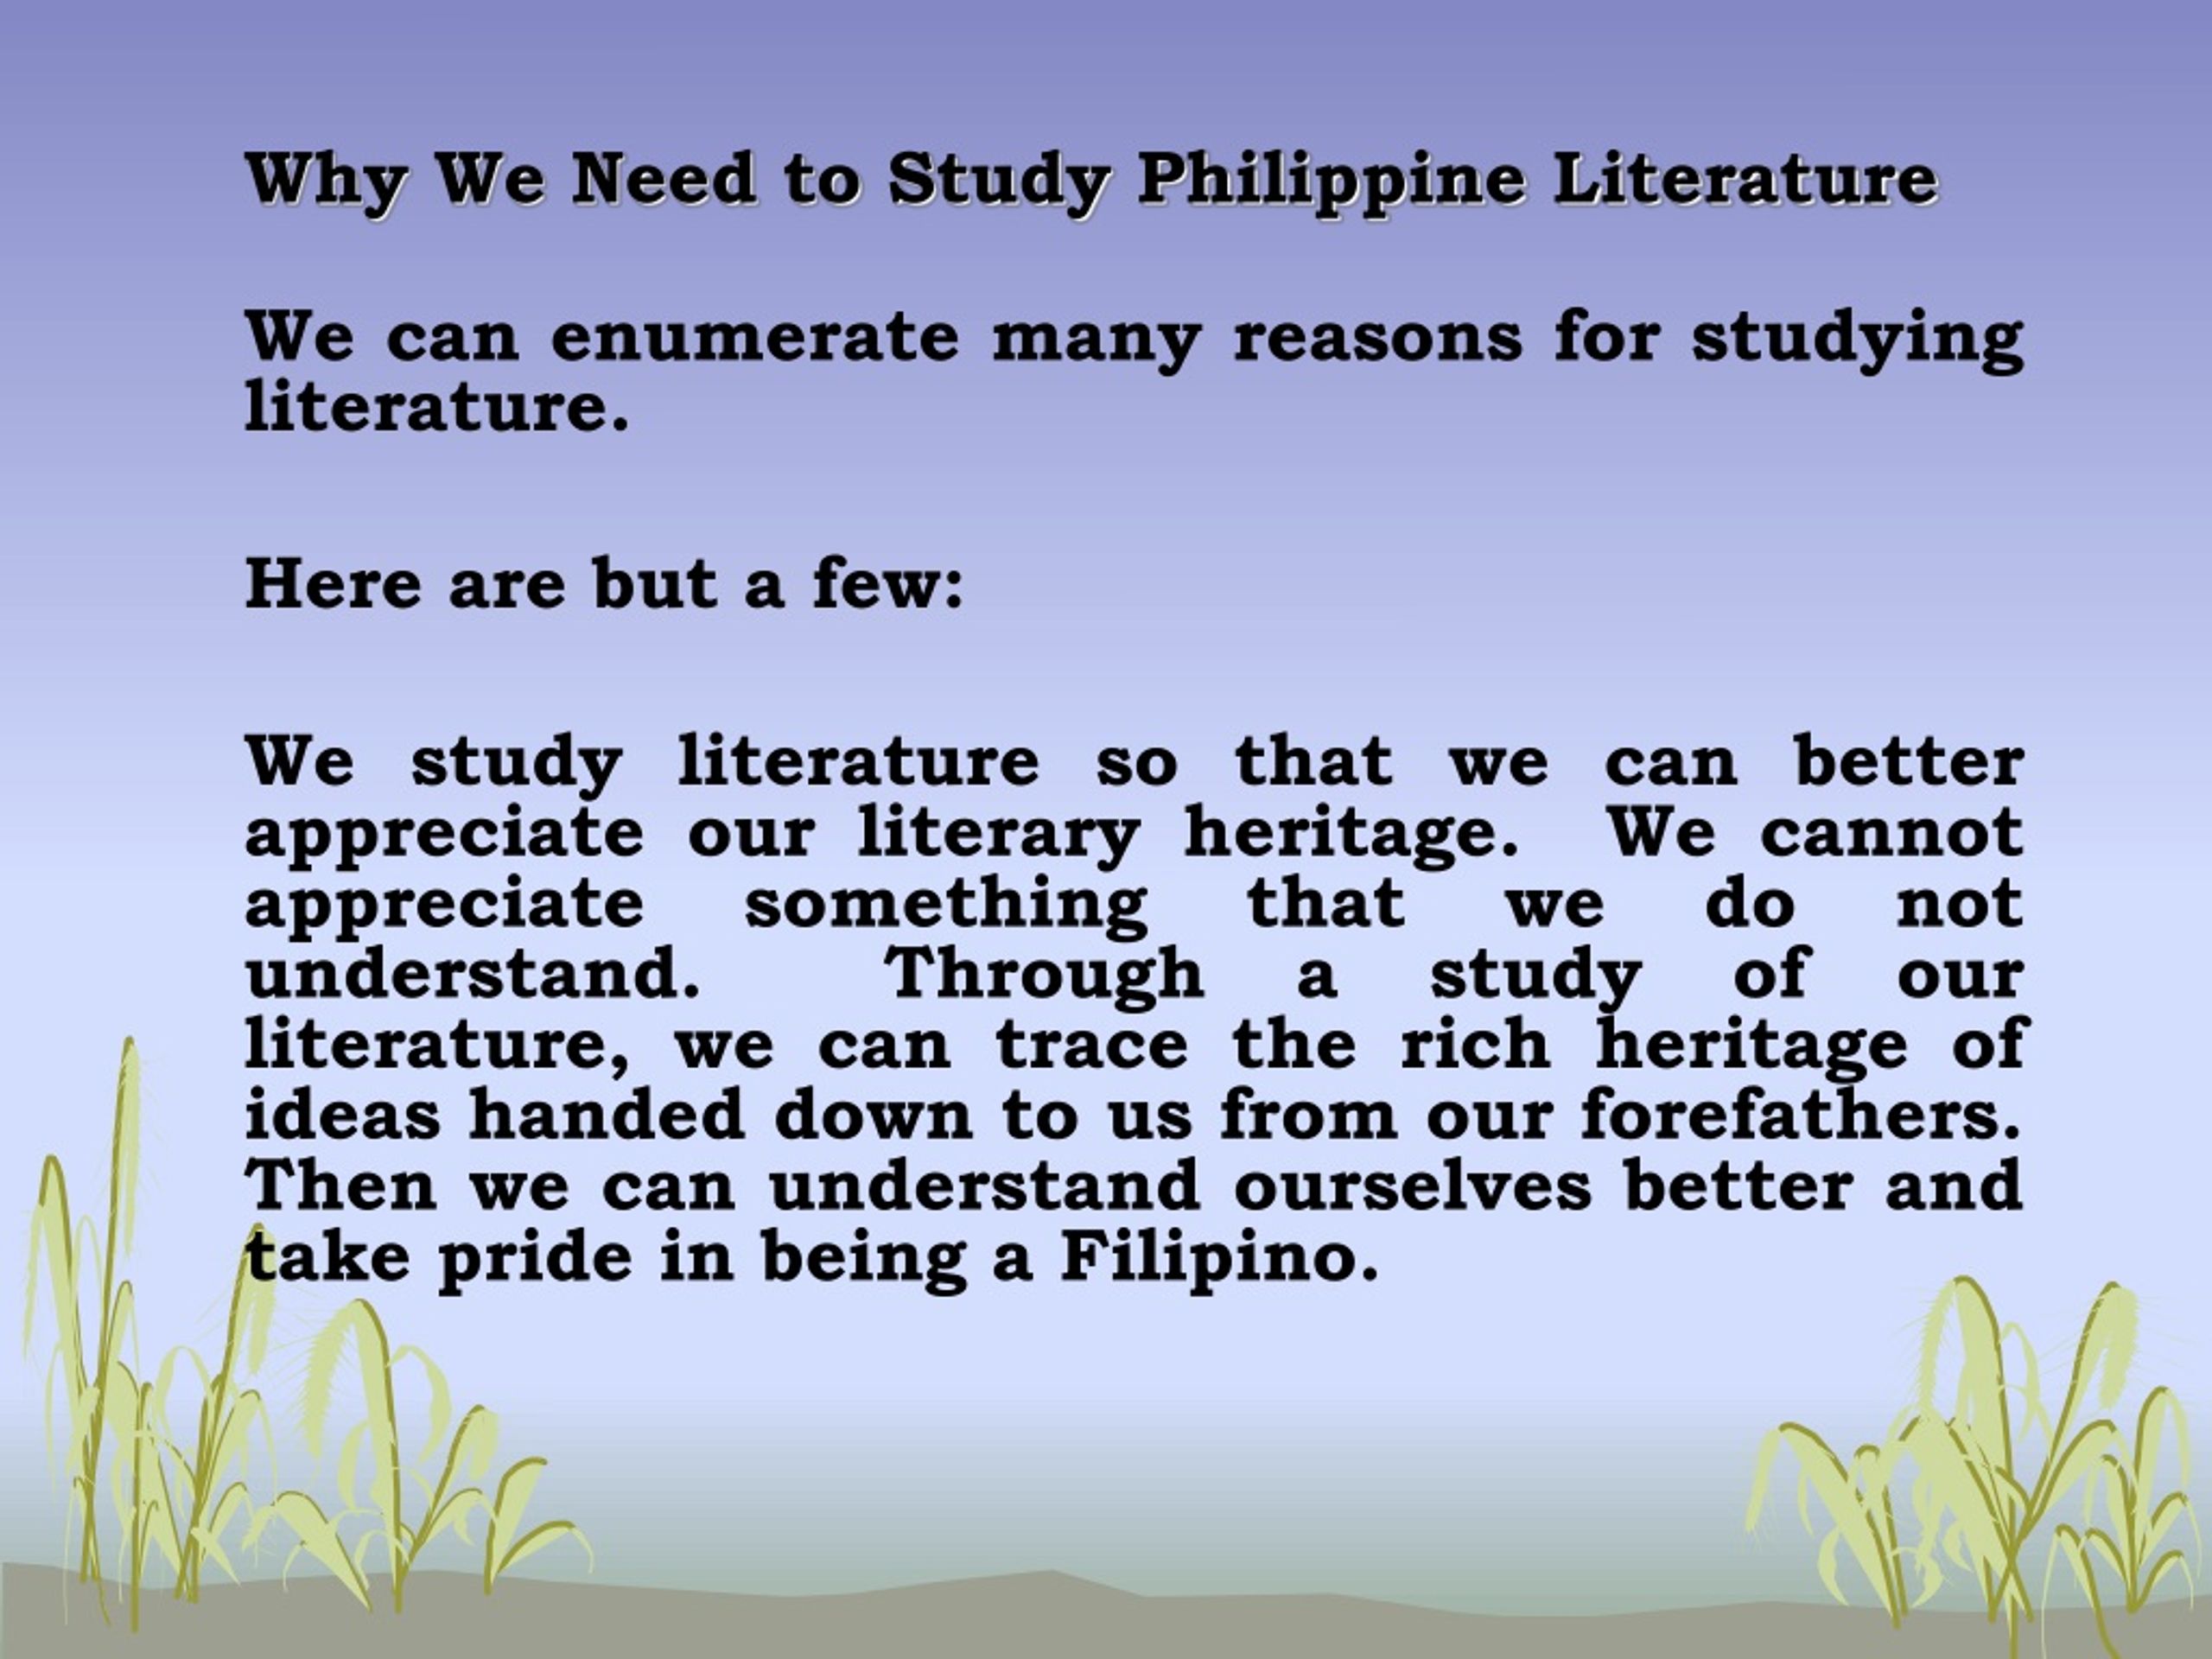 local literature in research philippines